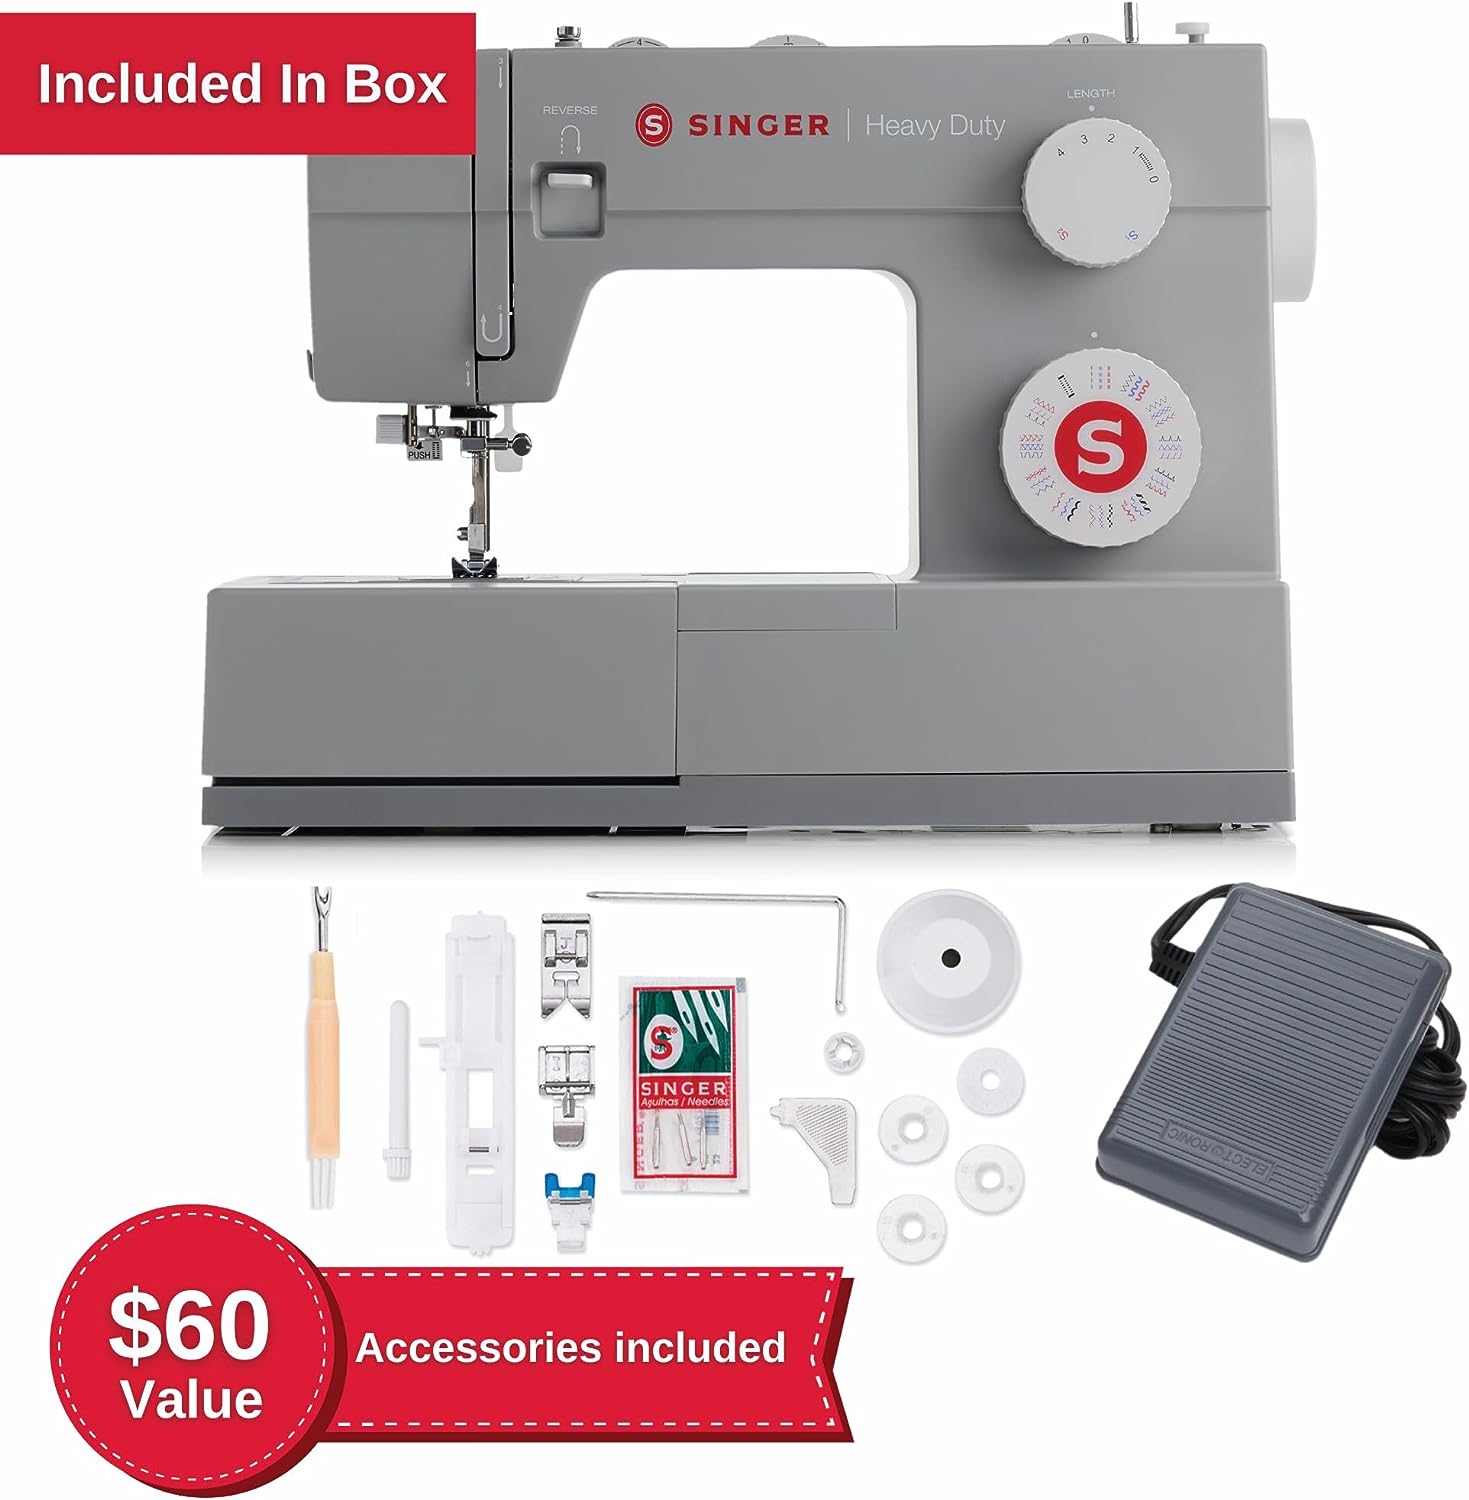 SINGER Heavy Duty Sewing Machine With Included Accessory Kit, 110 Stitch  Applications 4432, Perfect For Beginners, Gray